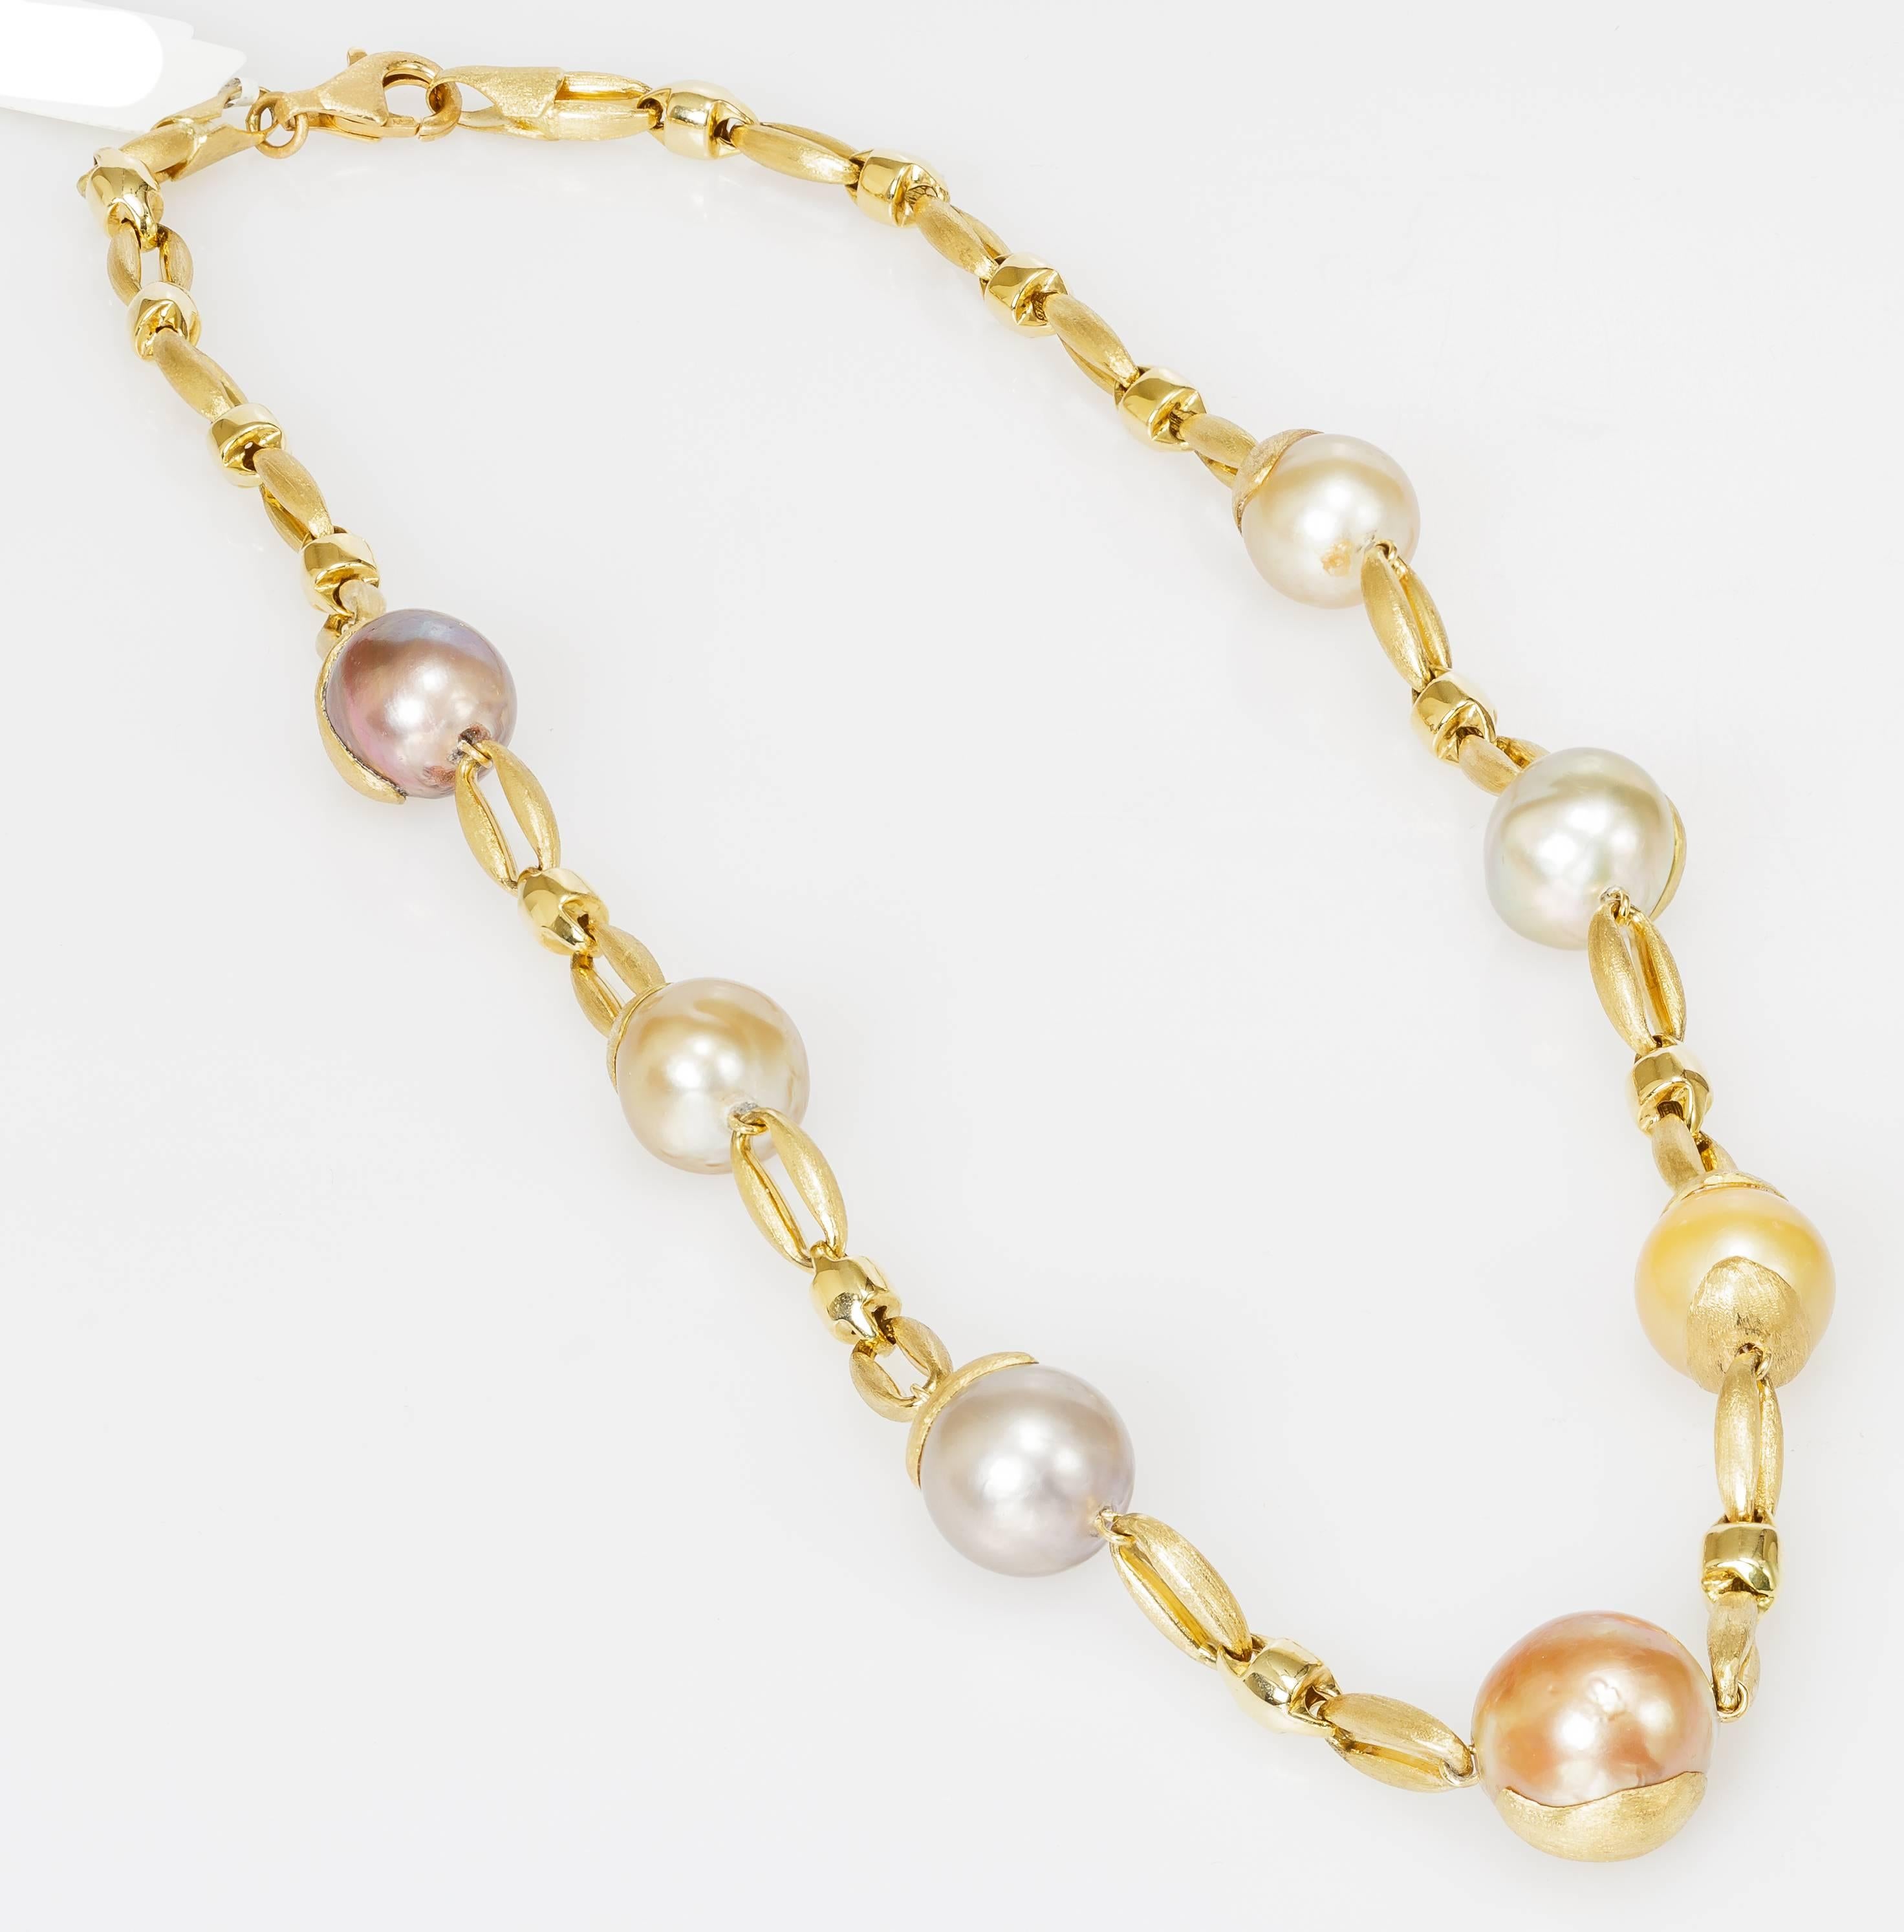 This Yvel necklace features multicolored South Sea pearls linked by 18k yellow gold.  The necklace measures 18 inches long.